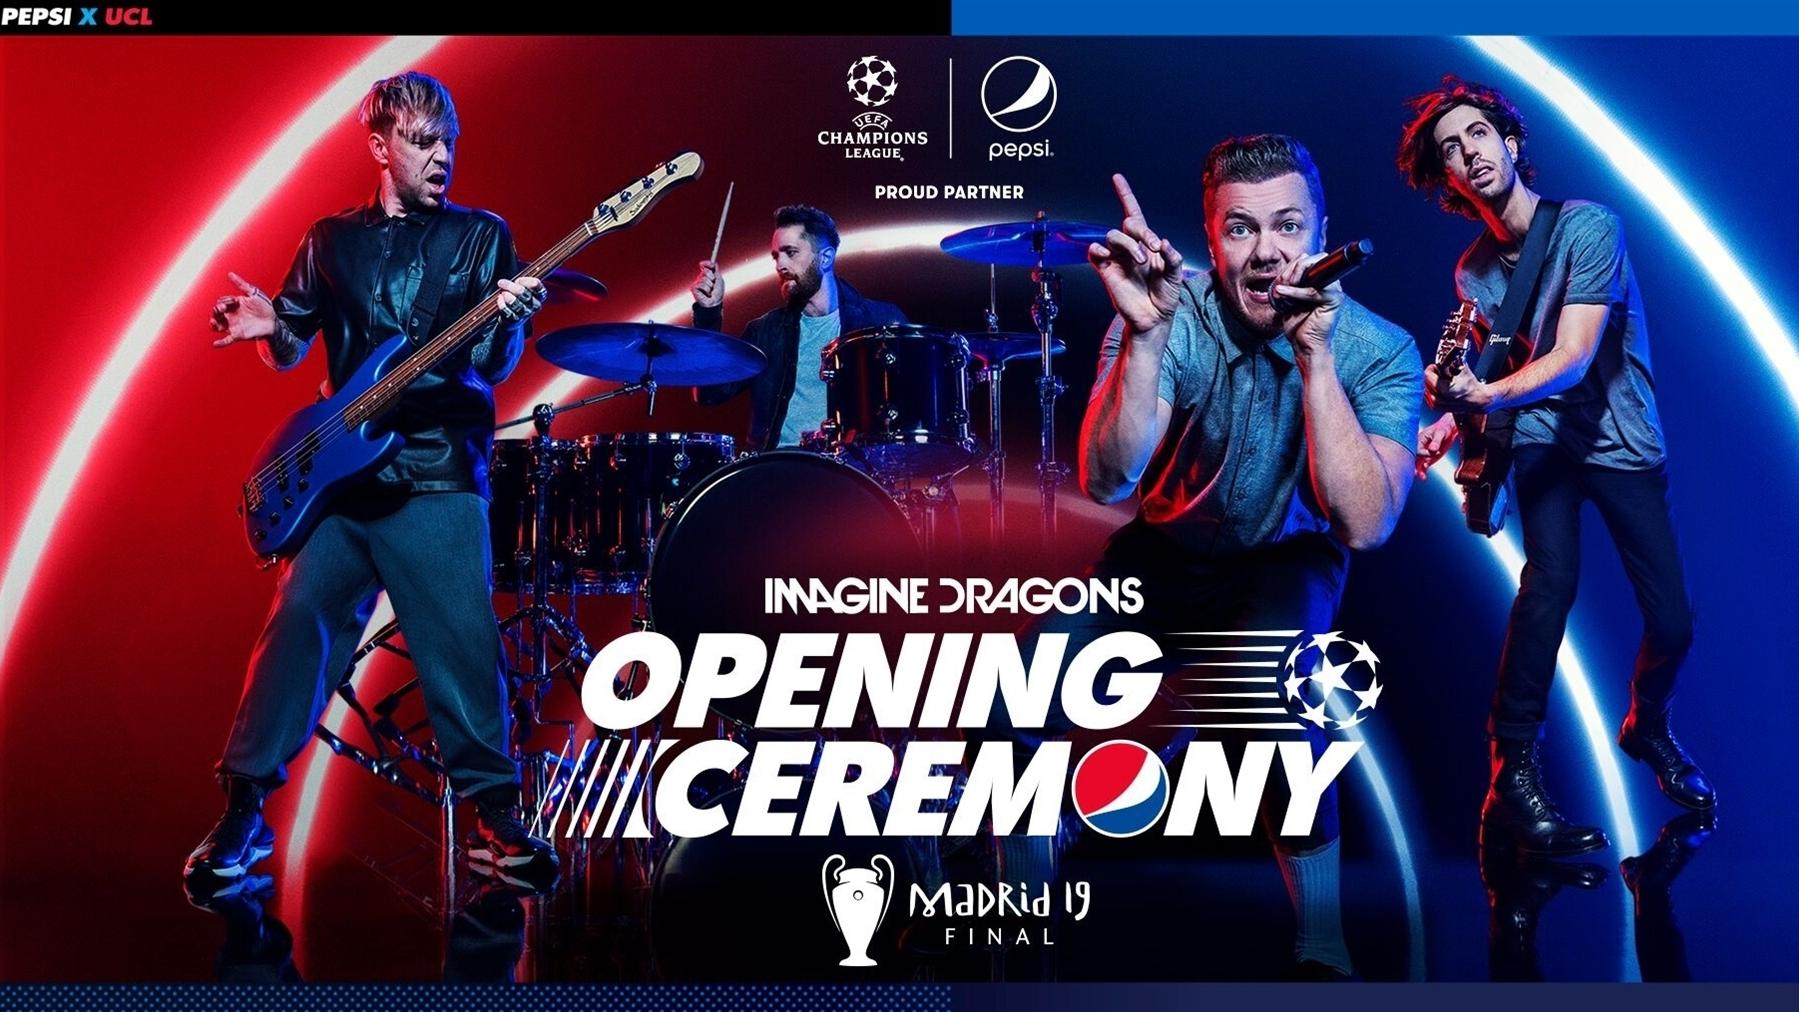 Imagine Dragons to perform at 2019 UEFA Champions League final opening